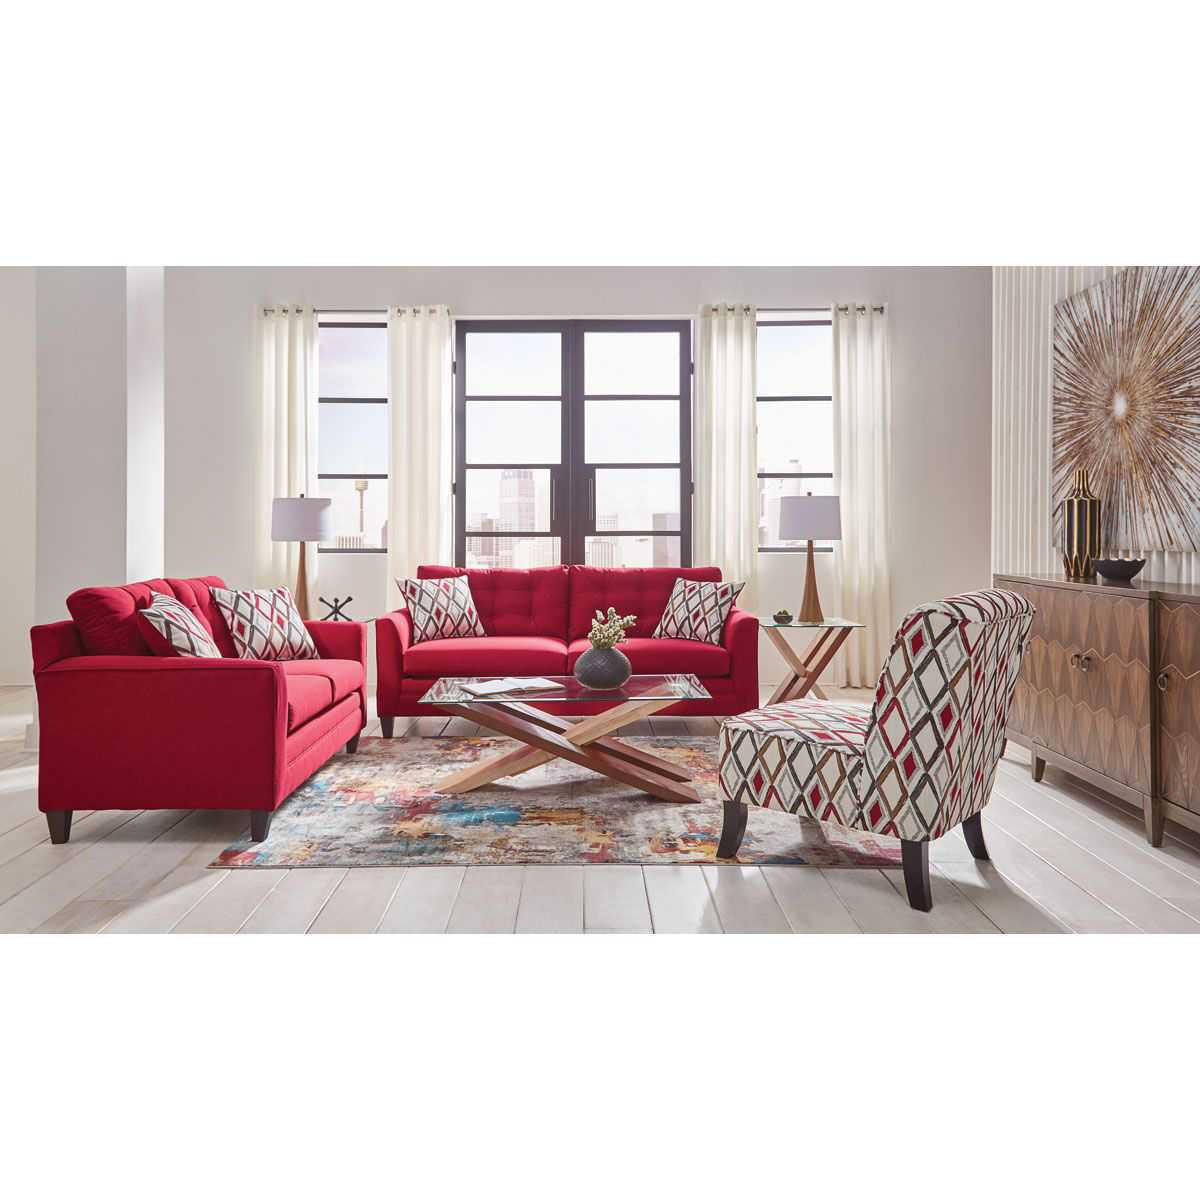 HALEY RED ACCENT CHAIR Badcock Furniture &more